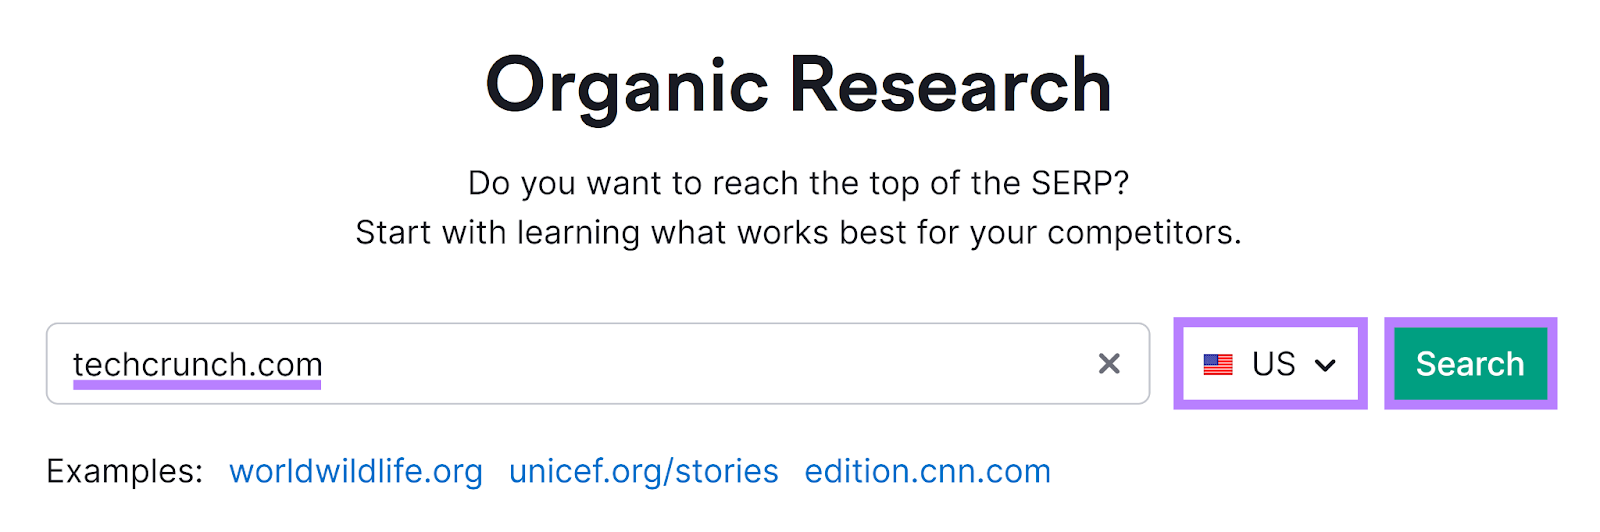 Semrush Organic Research tool start with domain, country, and search button highlighted